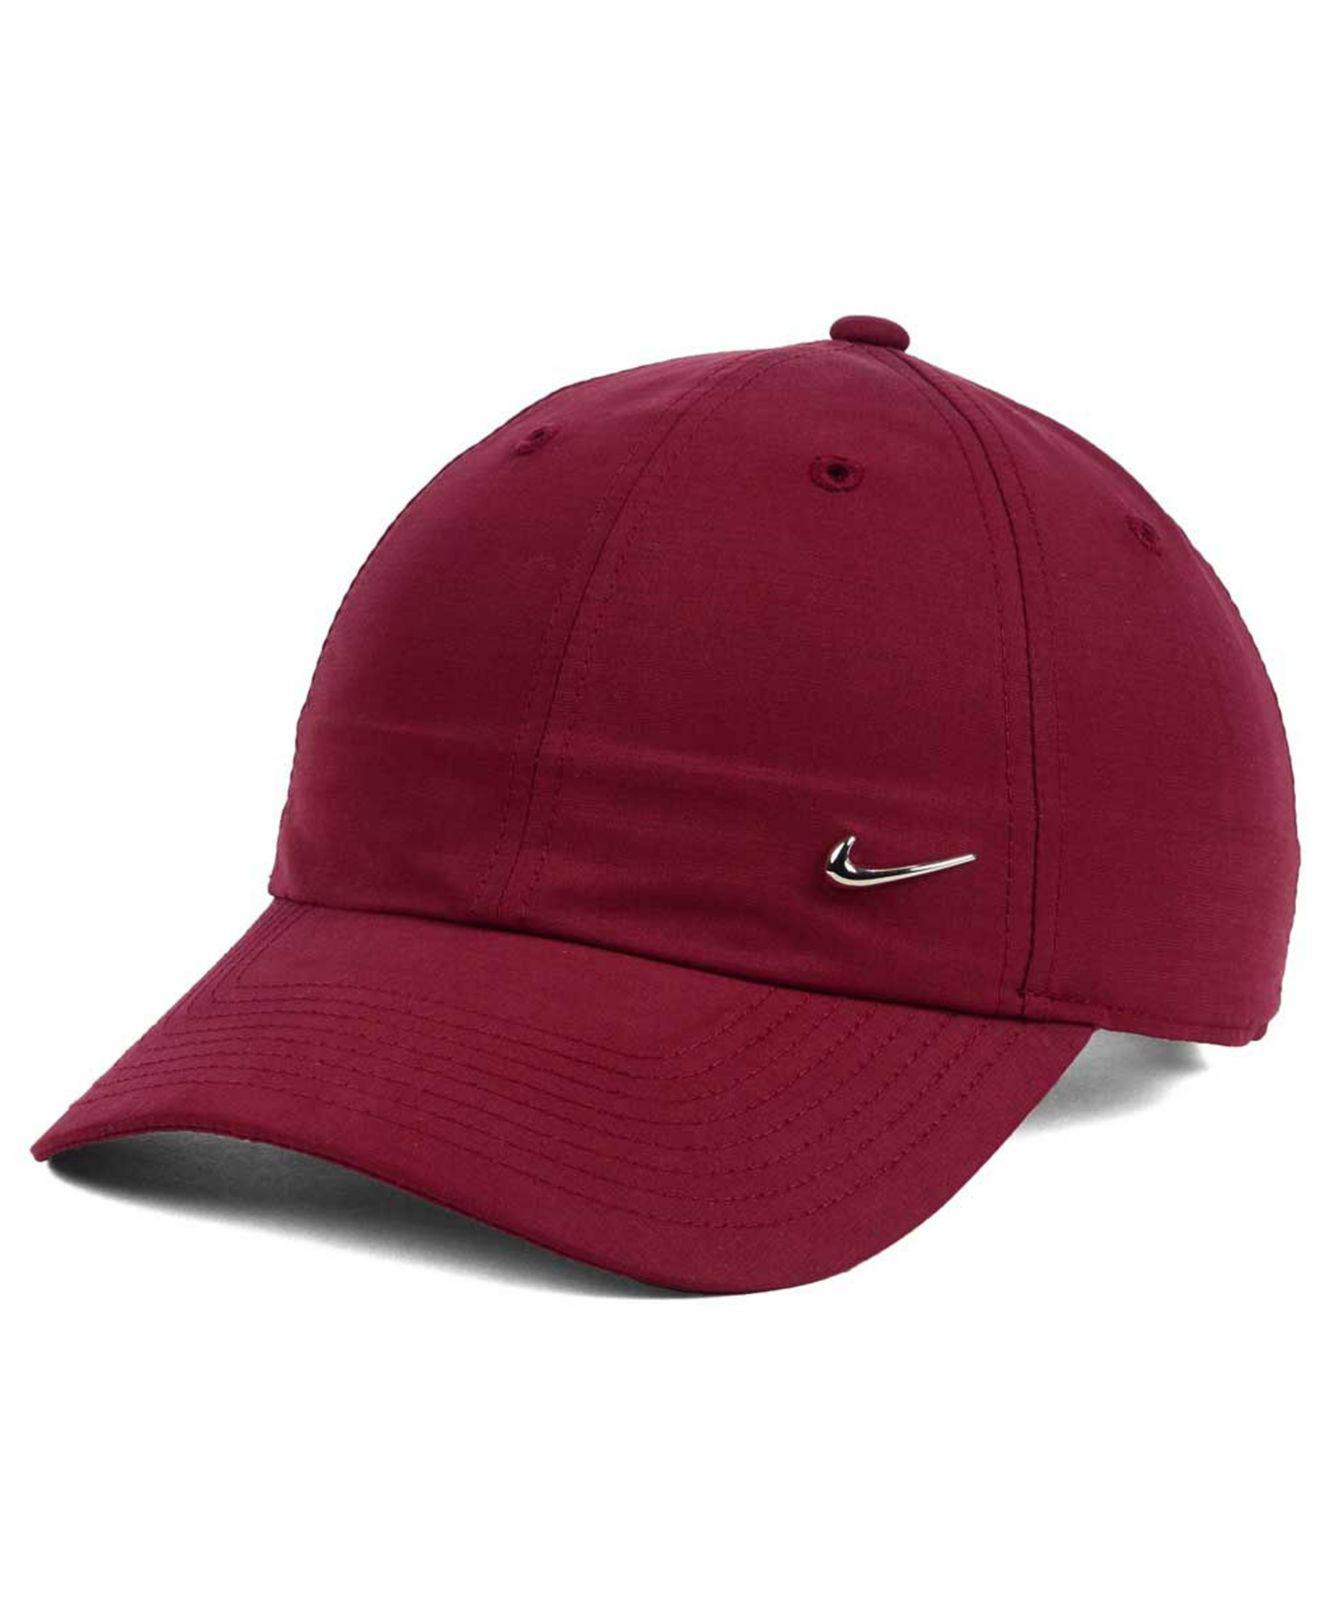 Bage champion Påvirke Nike Synthetic Metal Swoosh Cap in Maroon/Silver (Red) for Men - Lyst